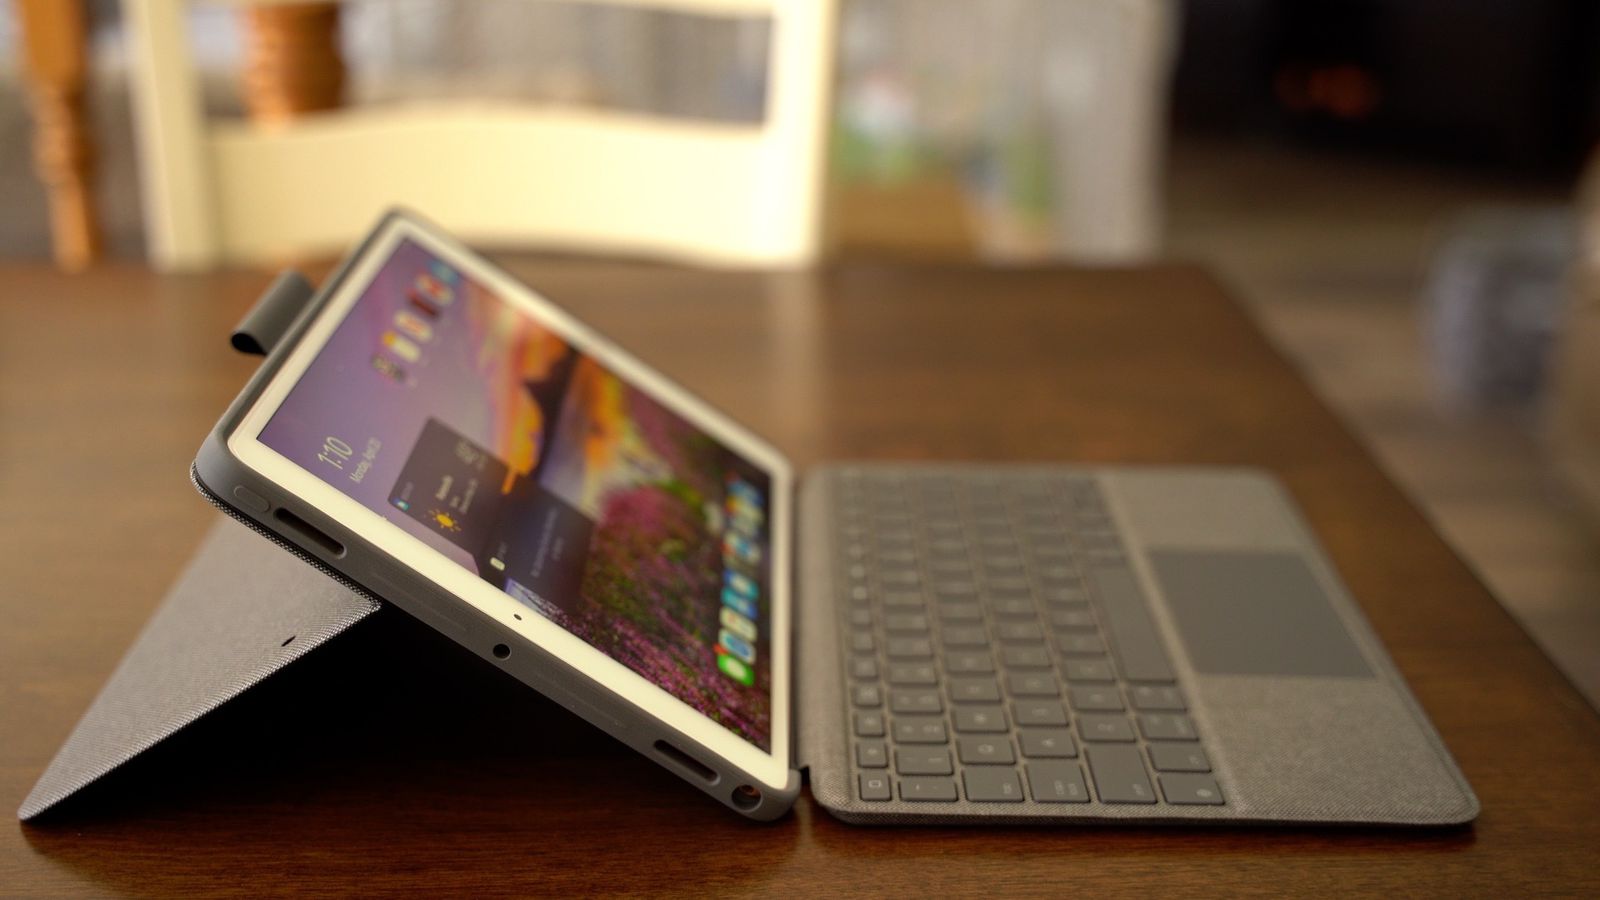 Hands On With Logitech S New Keyboard Case With Trackpad For Ipad Air Updated Macrumors